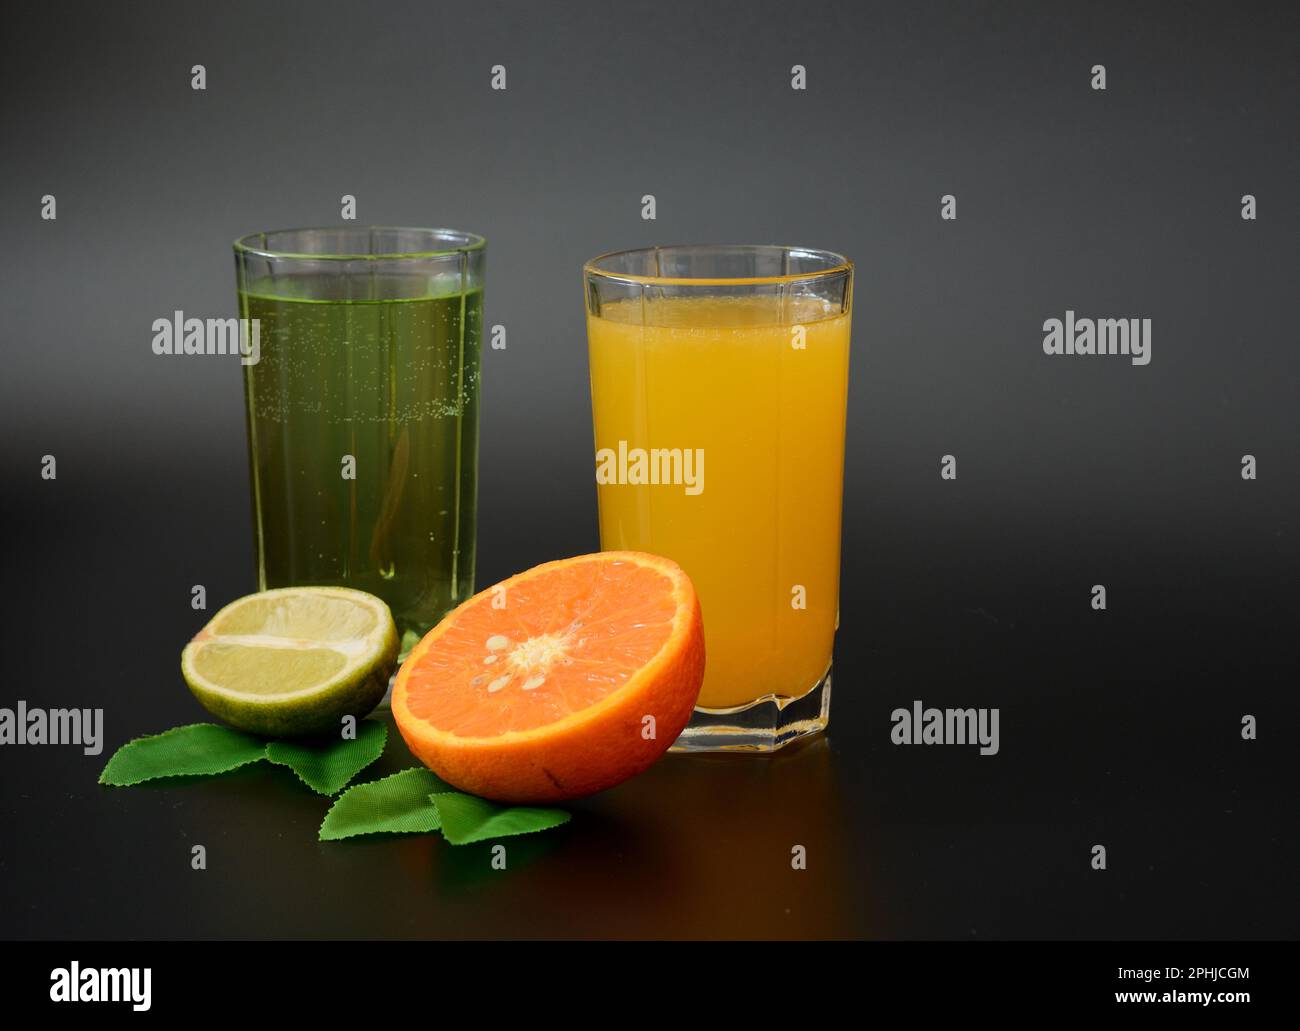 Two glasses with different citrus juices on a black background, next to pieces of ripe orange and lime with leaves. Close-up. Stock Photo